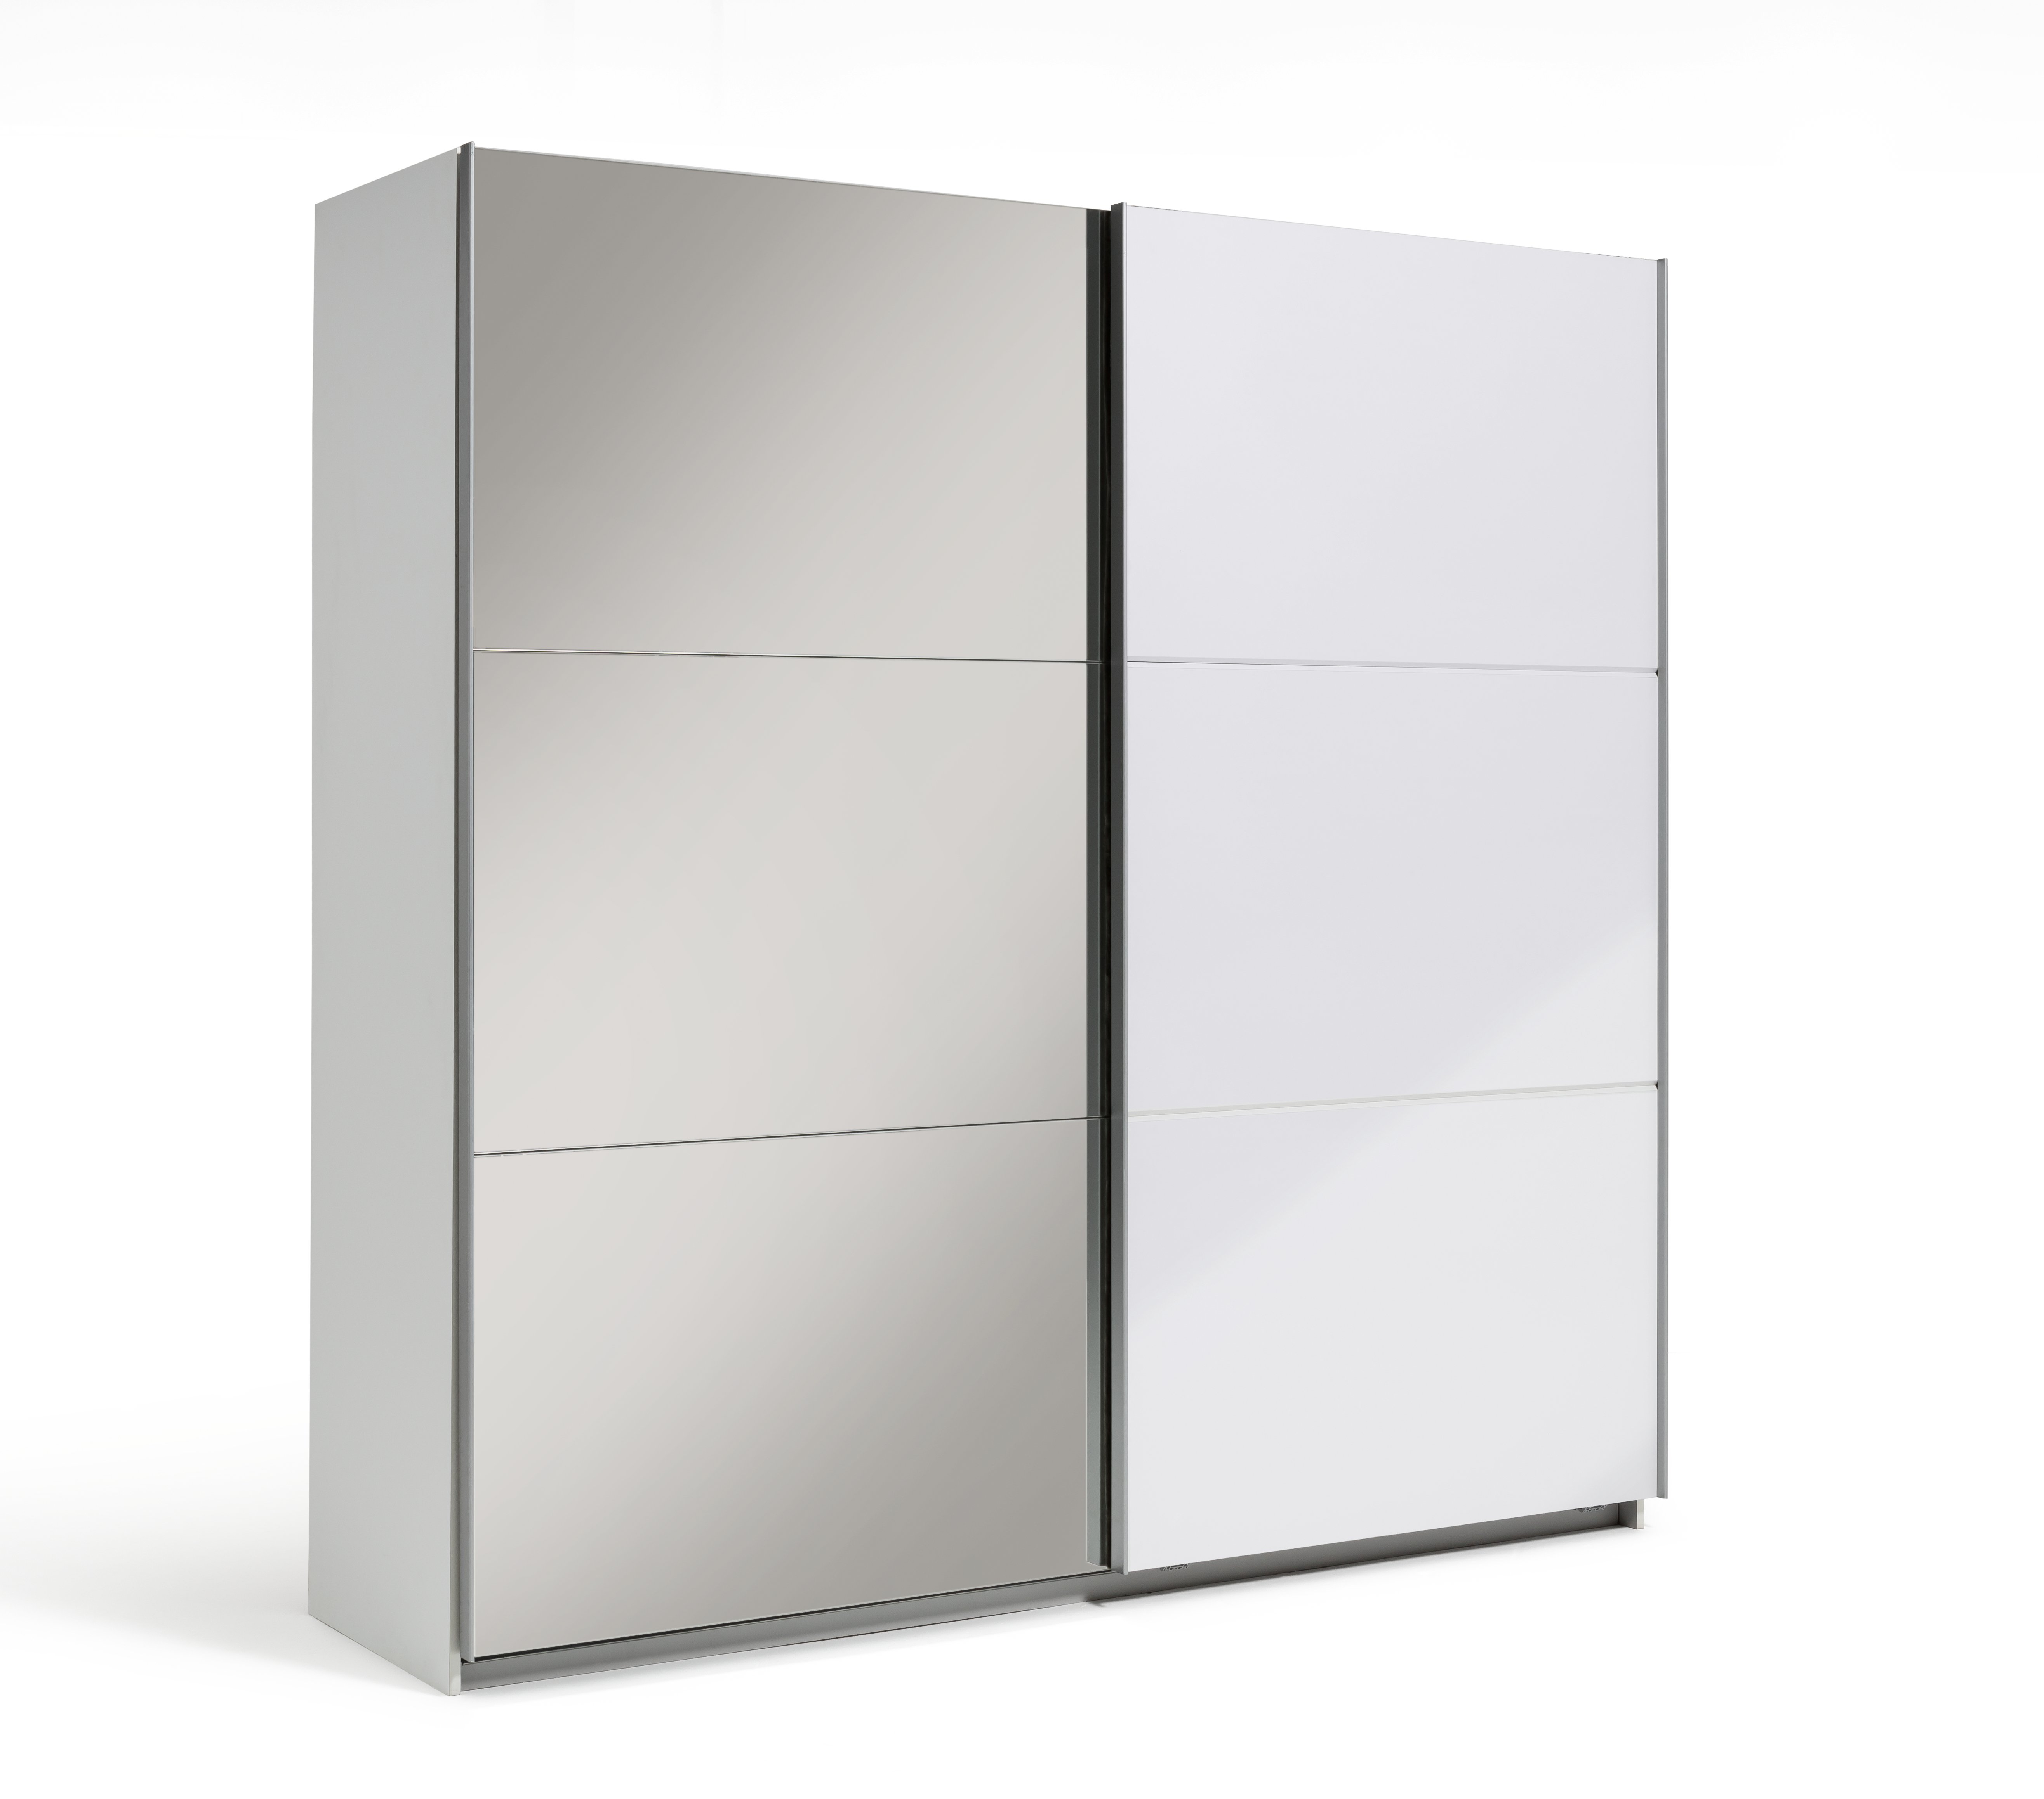 Argos Home Holsted Extra Large White Gloss & Mirror Wardrobe Review